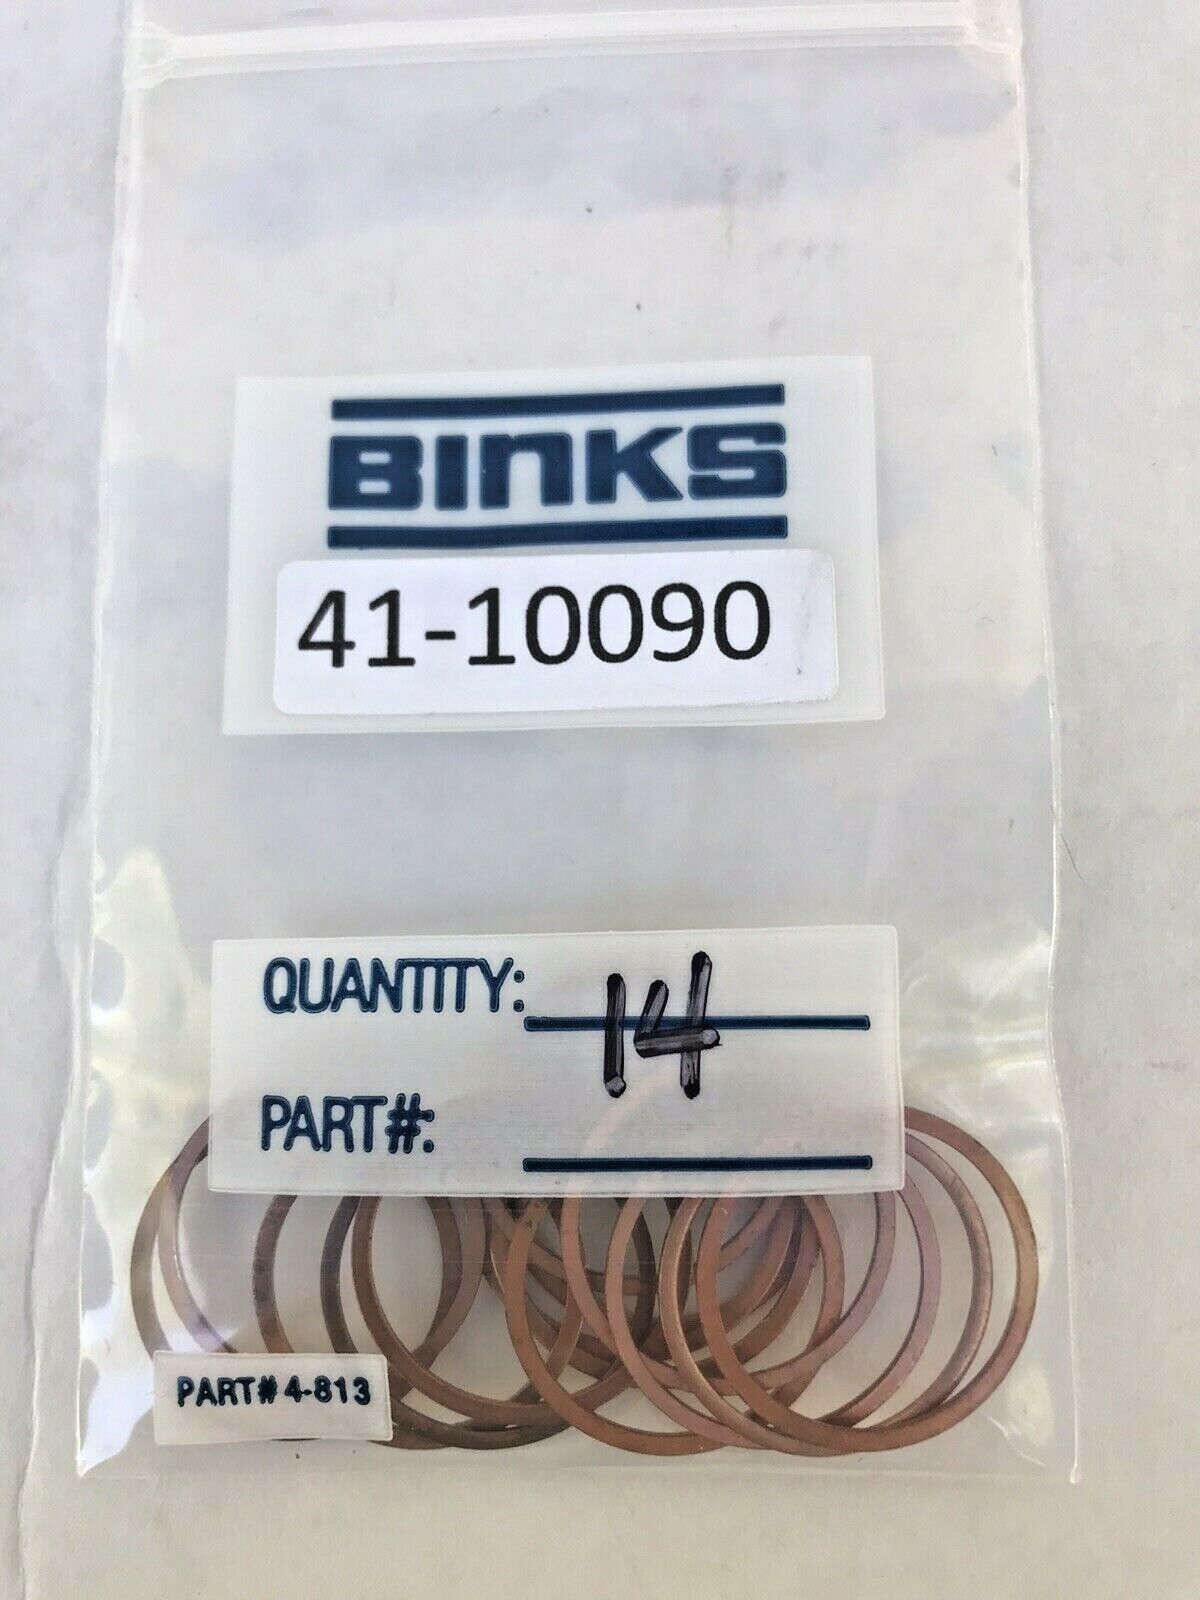 ONE LOT OF 7 BINKS SKU'S = RETAINERS / GLANDS / RETAINERS AND GASKETS - 20 ITEMS Binks 41-10075 / 41-10080 / 41-10083 MORE - фотография #8